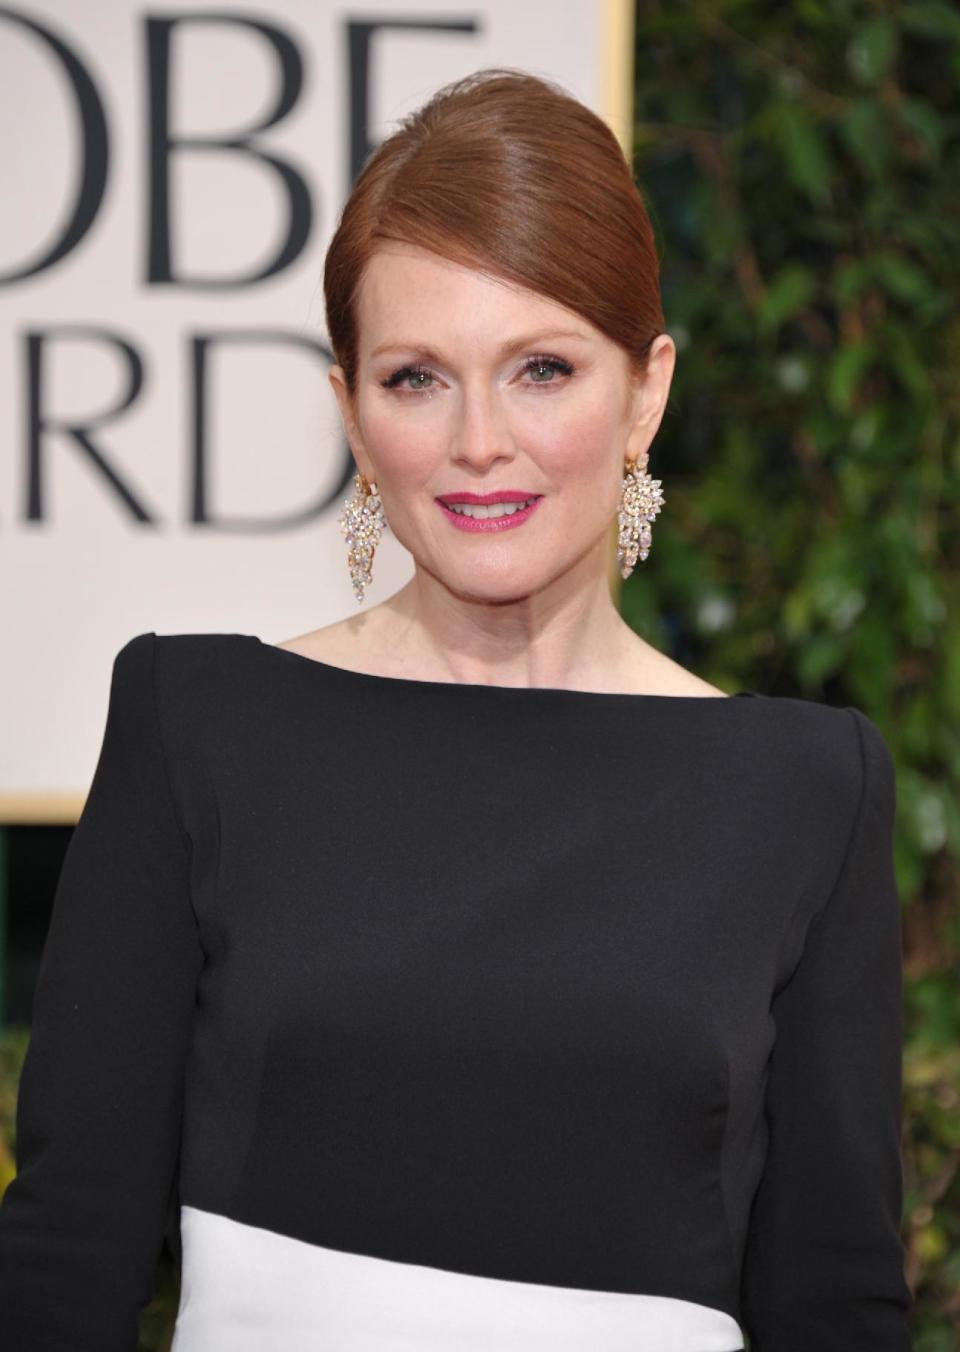 Actress Julianne Moore arrives at the 70th Annual Golden Globe Awards at the Beverly Hilton Hotel on Sunday Jan. 13, 2013, in Beverly Hills, Calif. (Photo by John Shearer/Invision/AP)